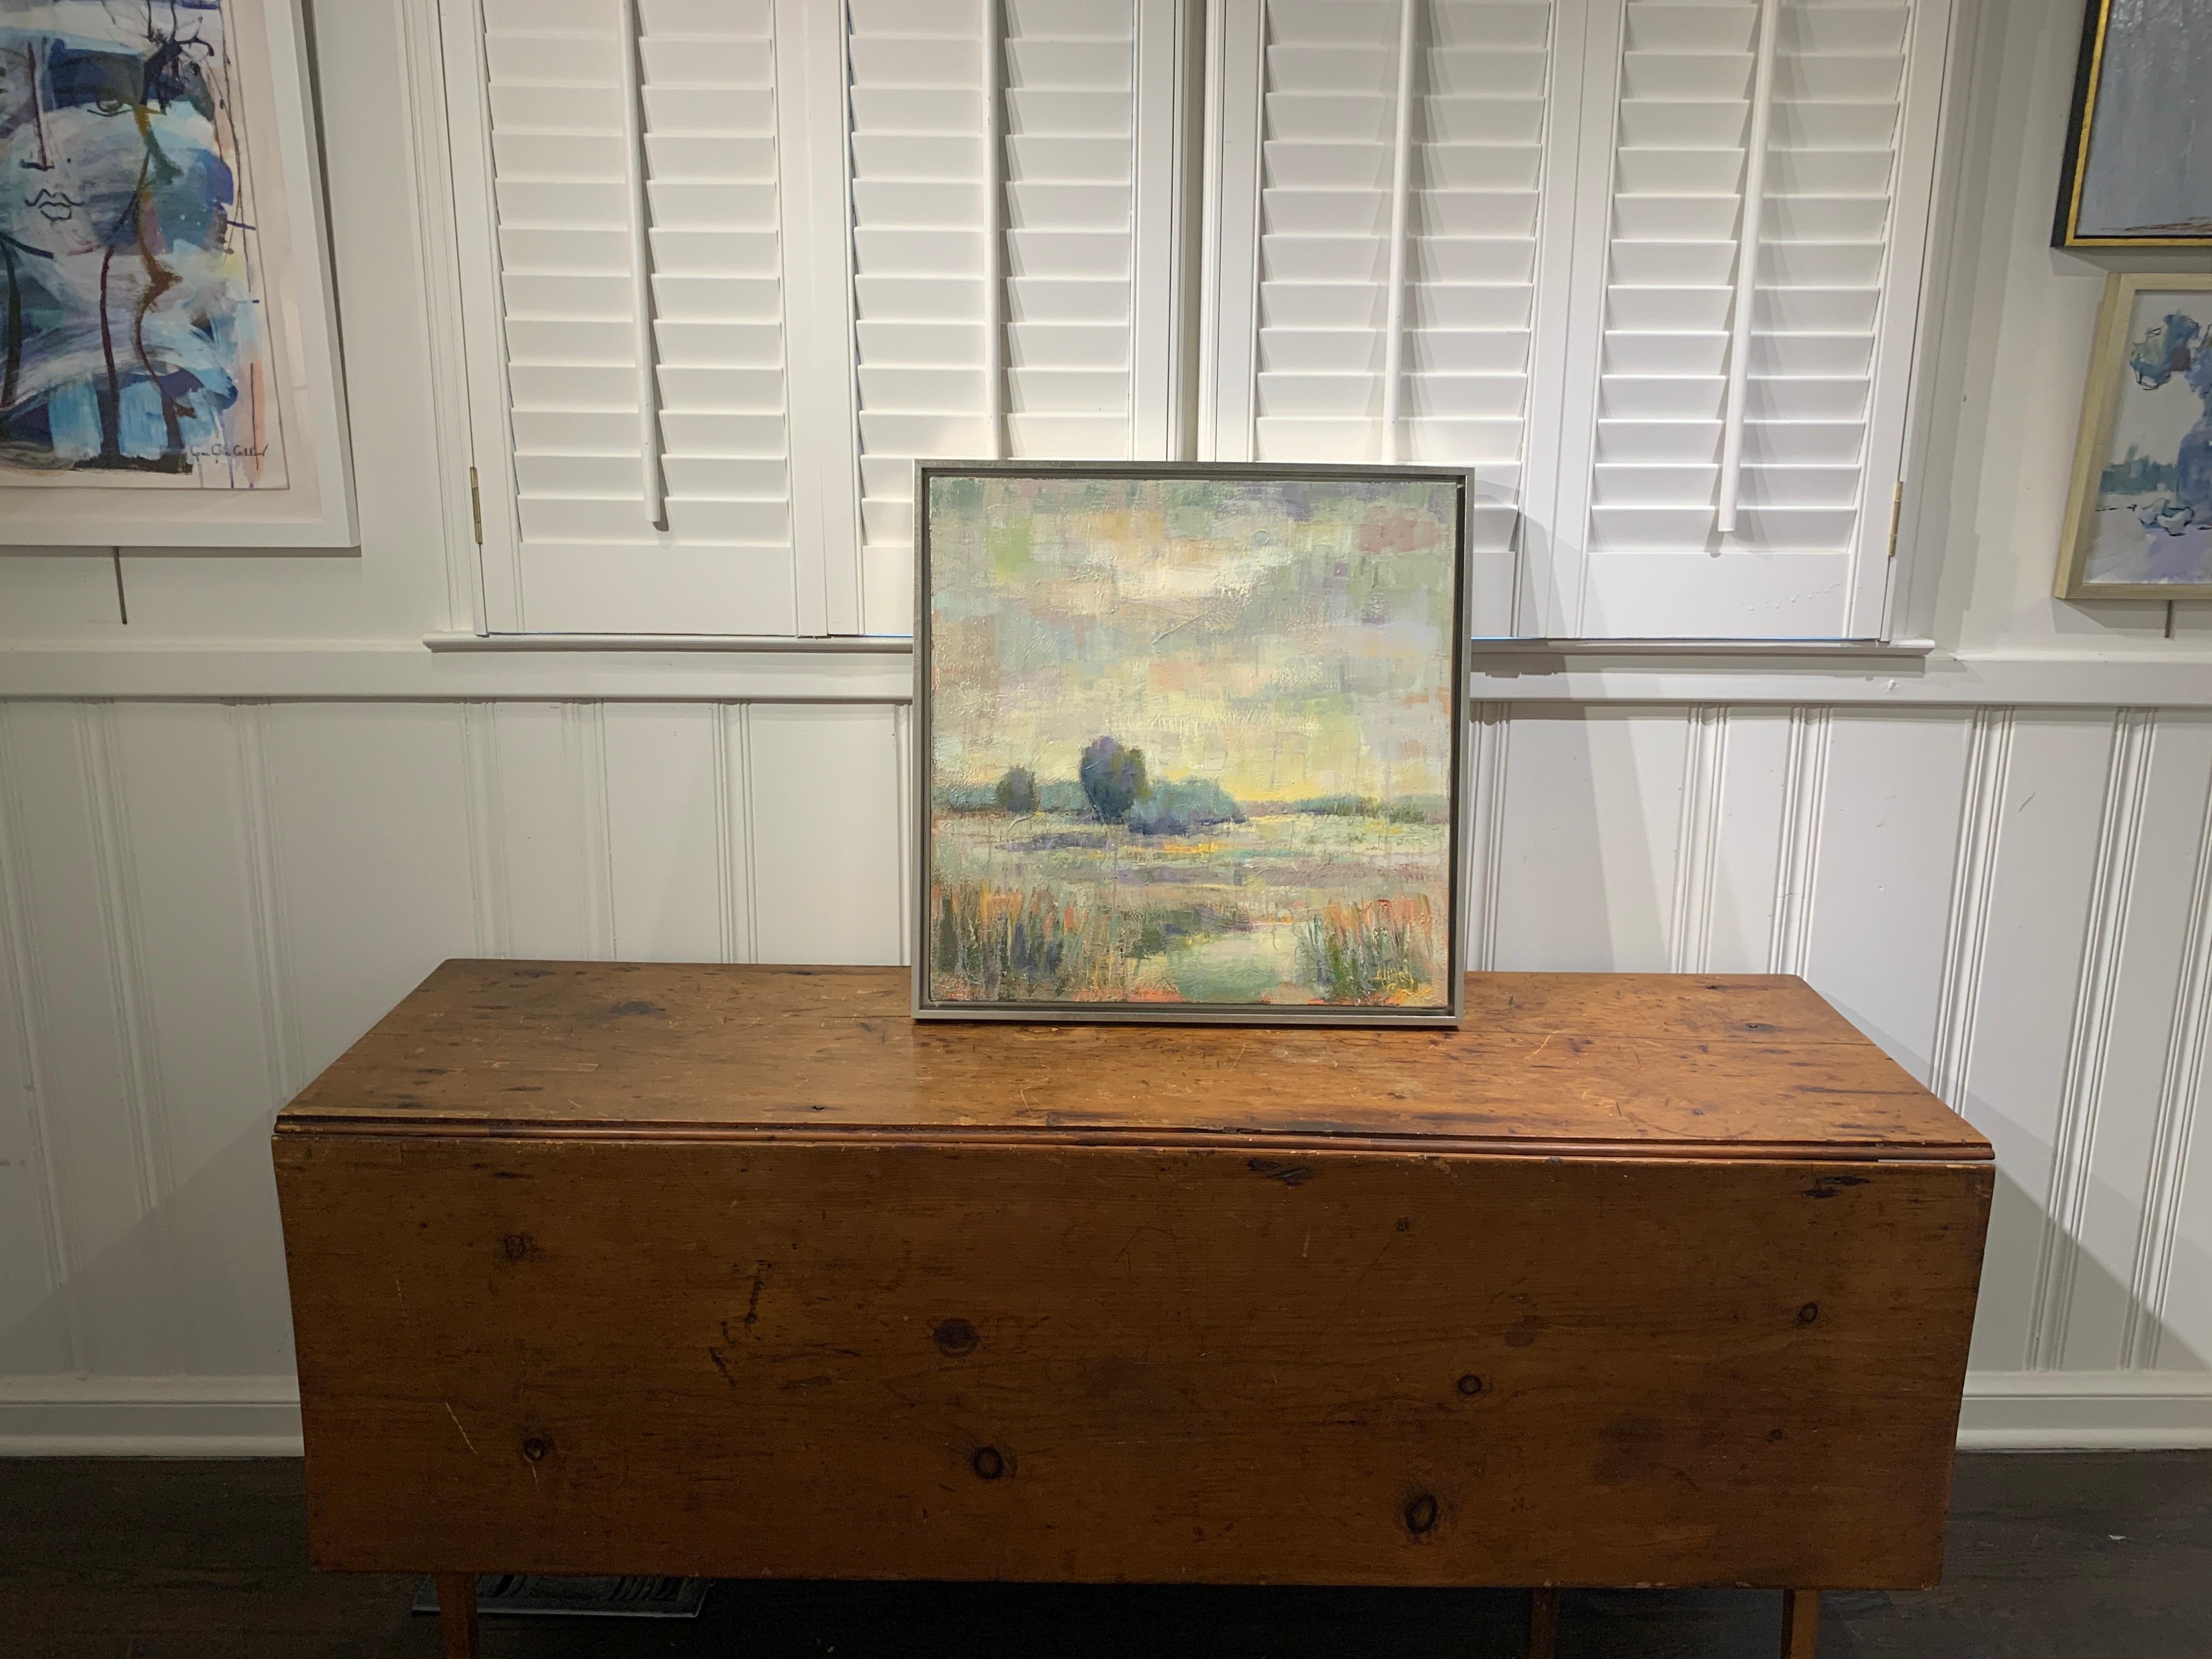 'Storms are Lifting' is a framed landscape oil on canvas painting of medium size, created by American artist Allison Chambers in 2020. Featuring a low country marsh scene in a palette made of a variety of colors such as blue, green, pink, purple and